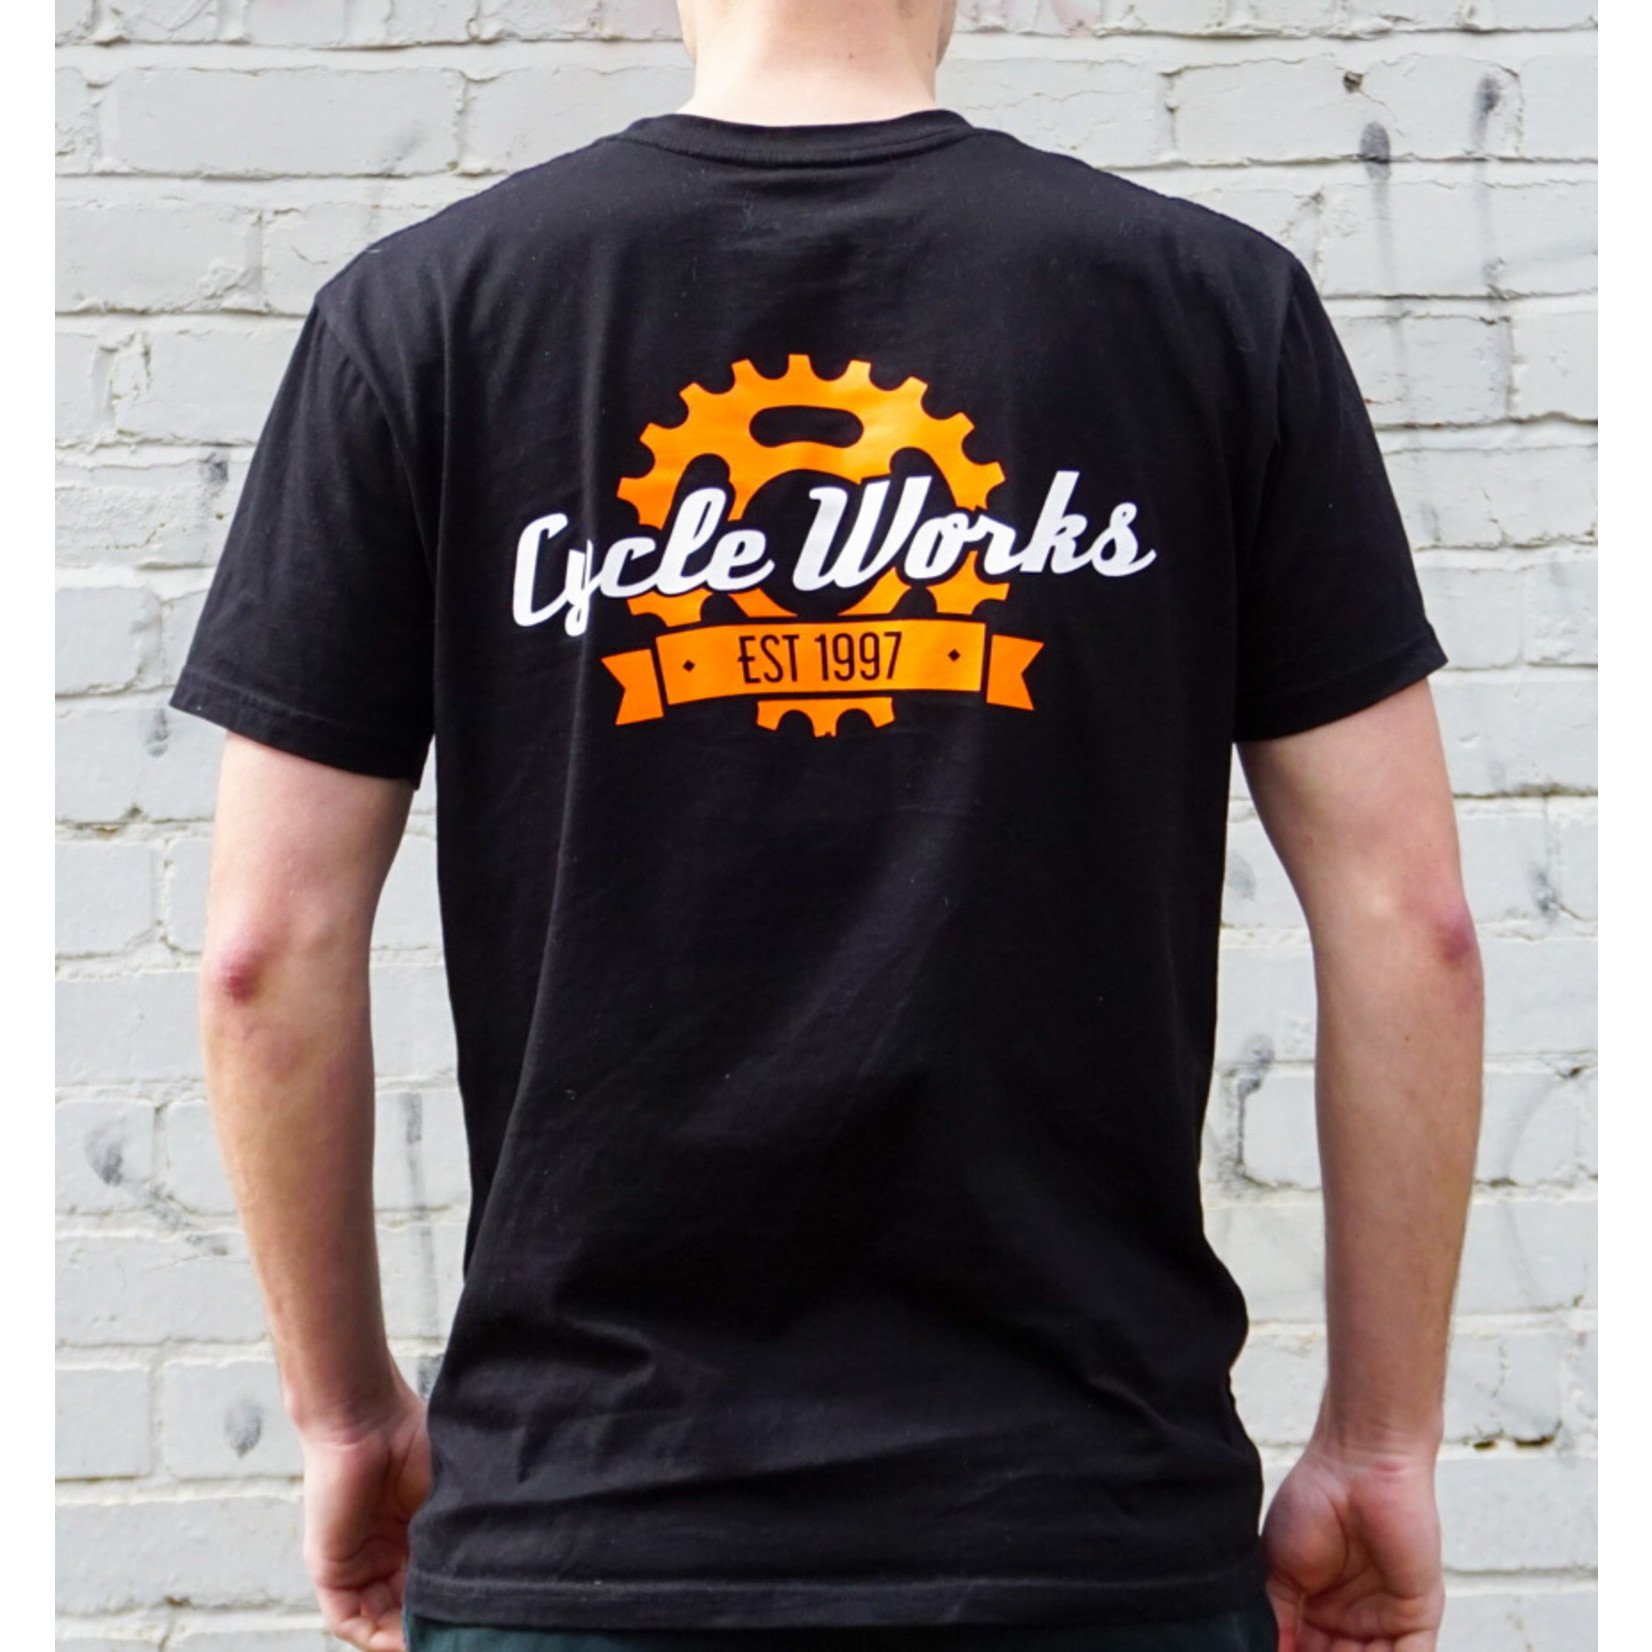 Cycle Works T-Shirt